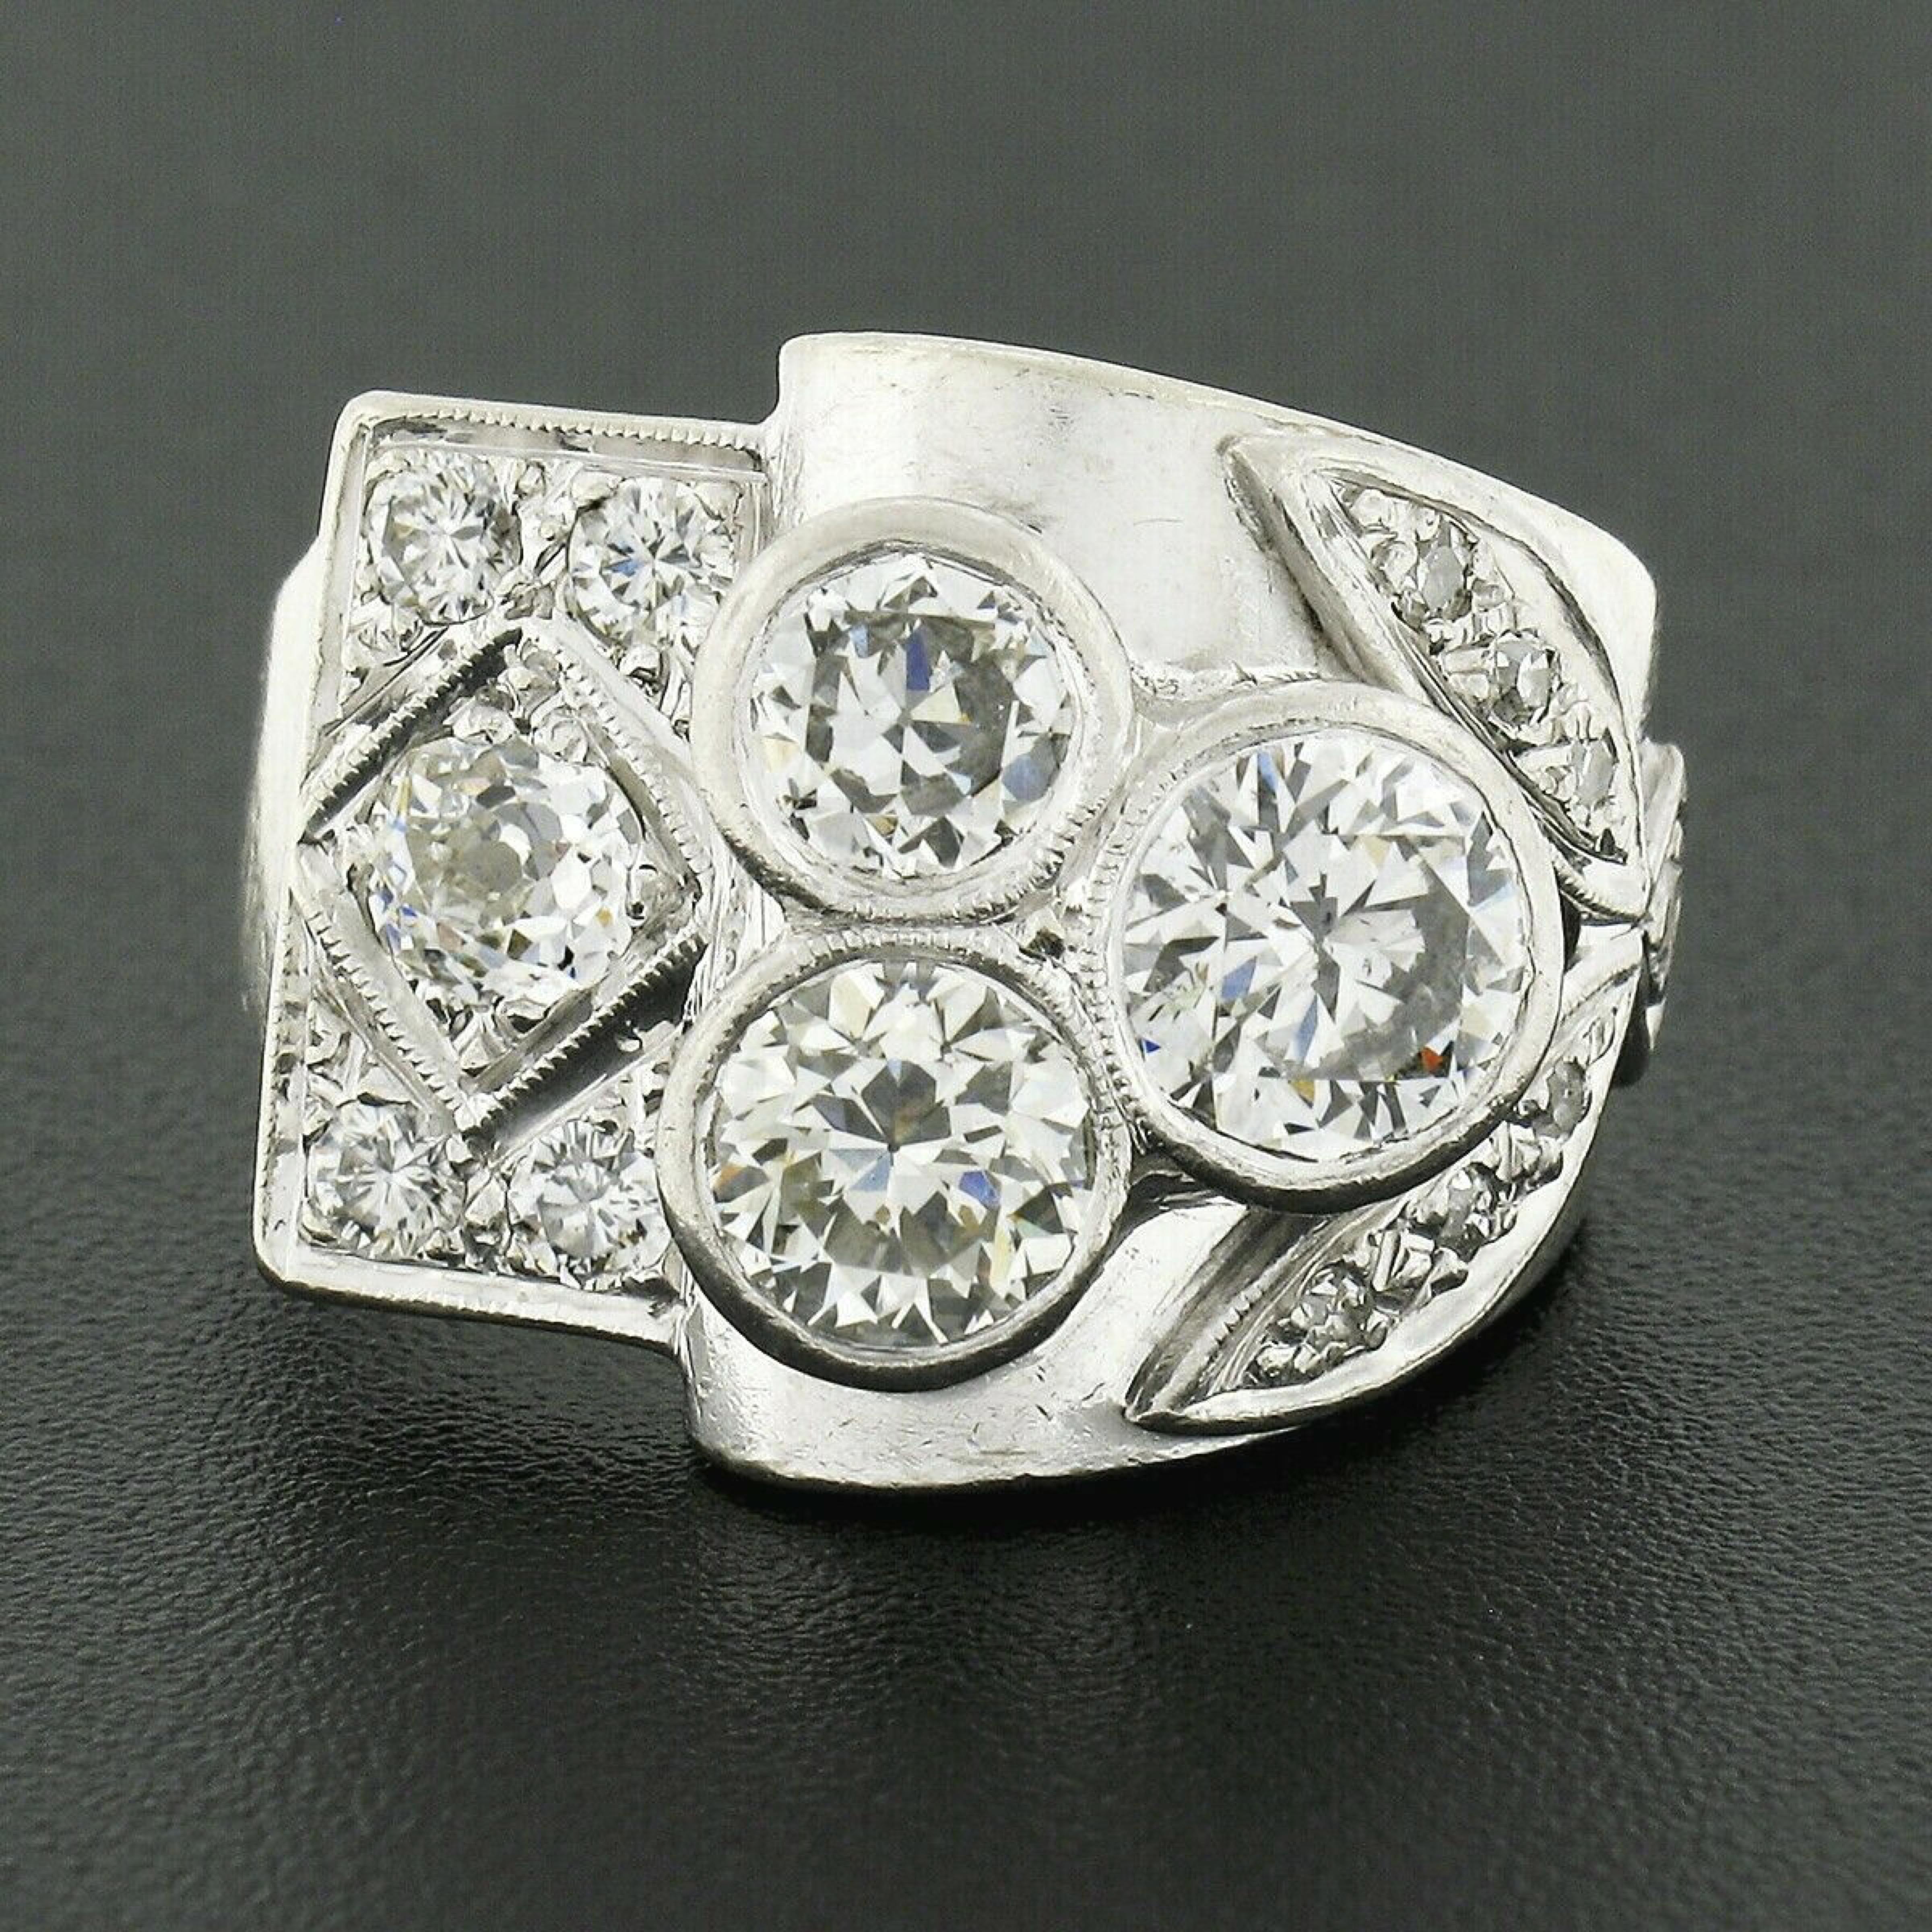 This is an absolutely gorgeous vintage cocktail ring that is crafted in solid 14k white gold featuring a unique design that almost resembles a beautiful bouquet of flowers. It is drenched with approximately 2.32 carats of very fine quality diamonds